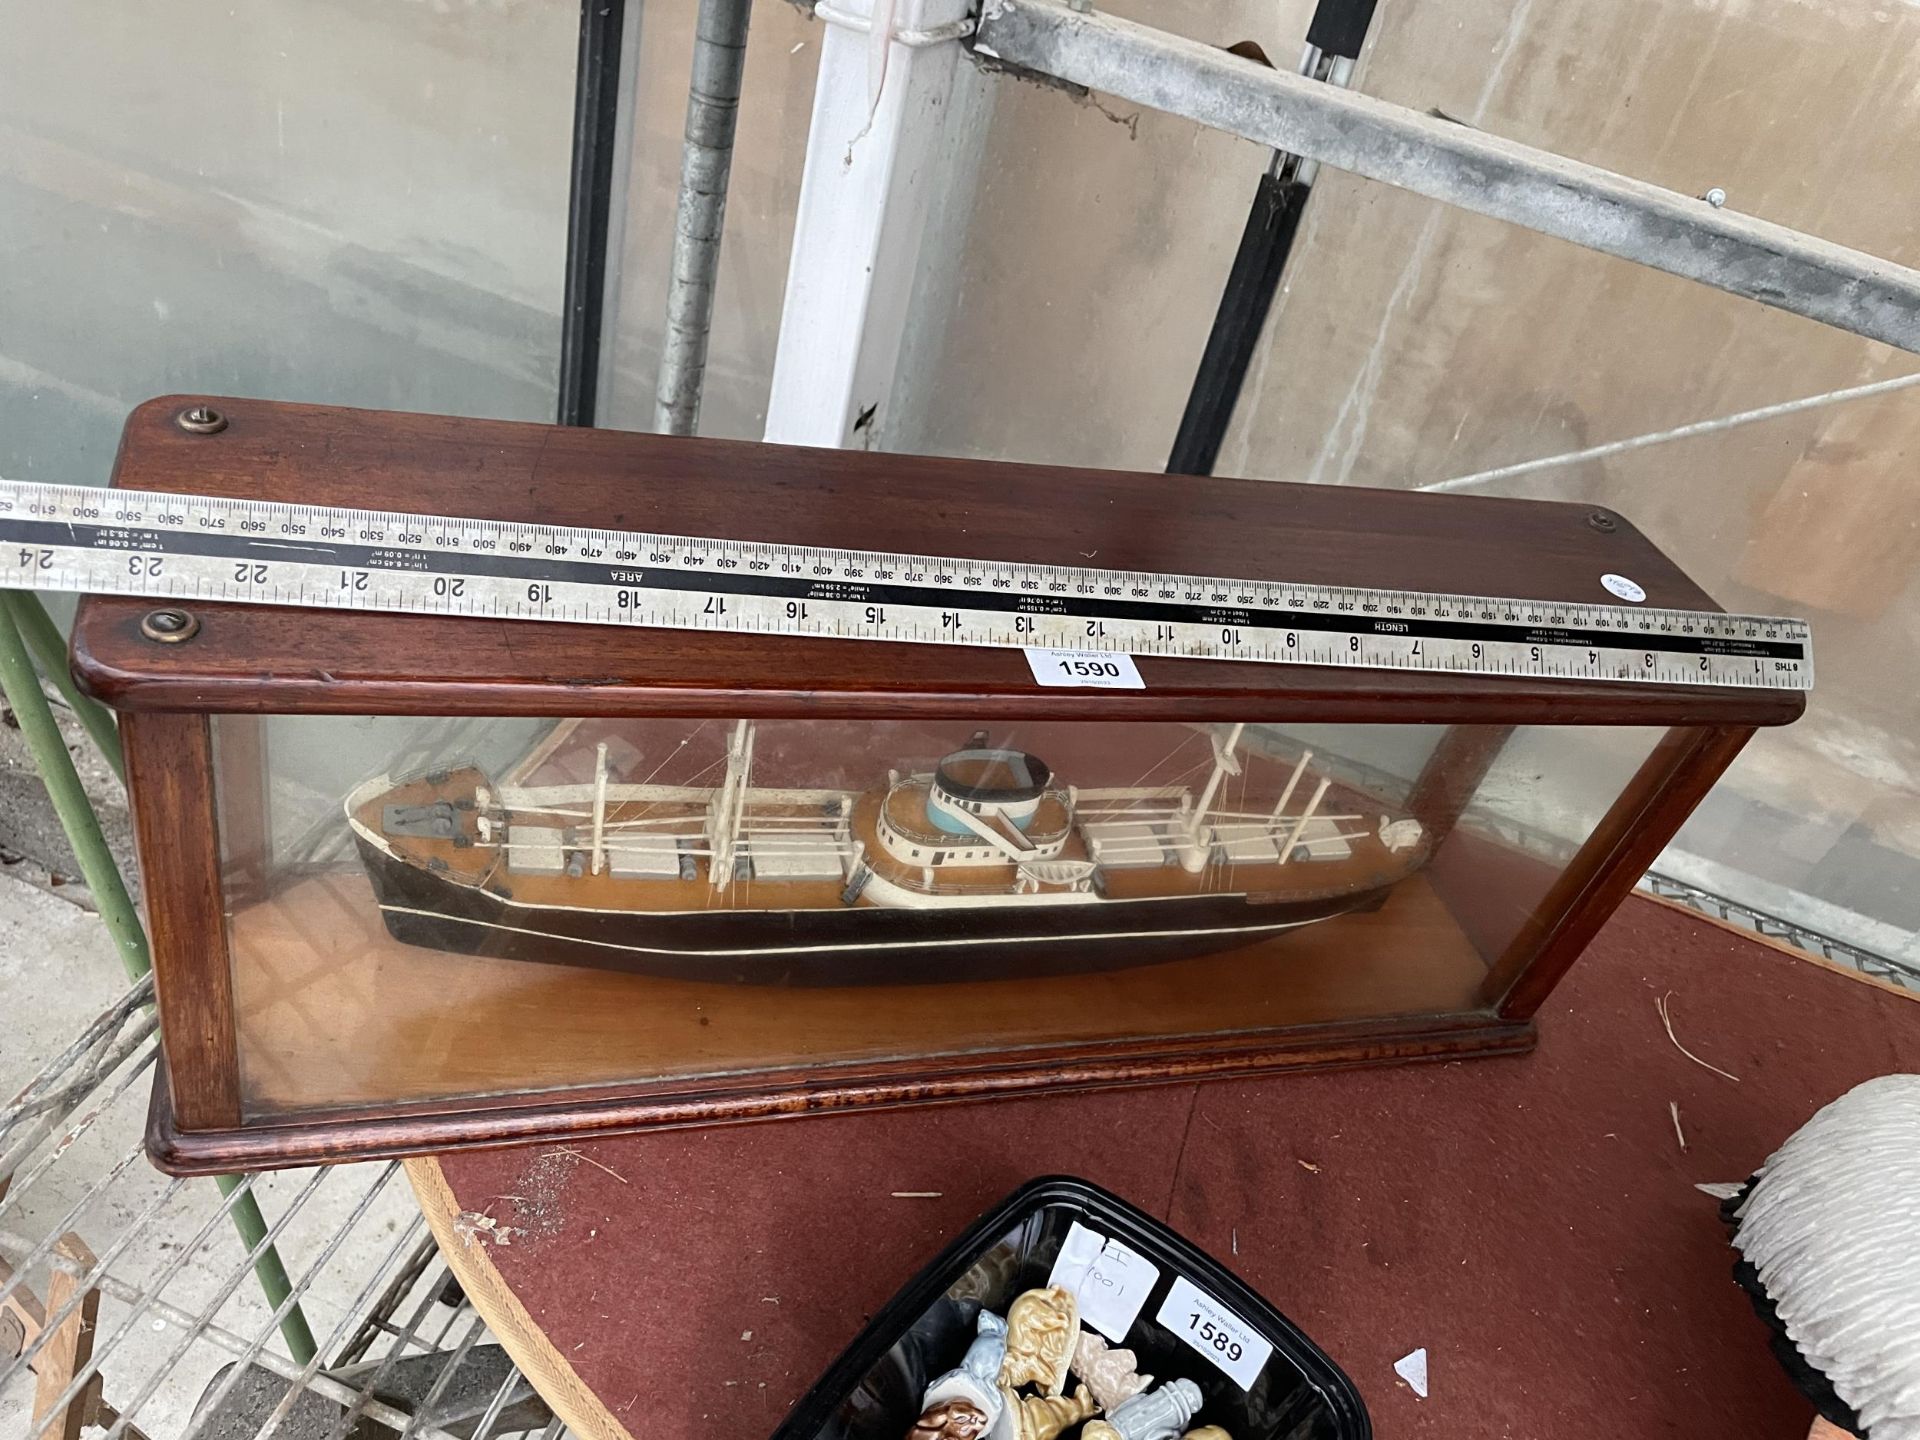 A MODEL OF A SHIP IN A GLASS DISPLAY CABINET - Image 5 of 6